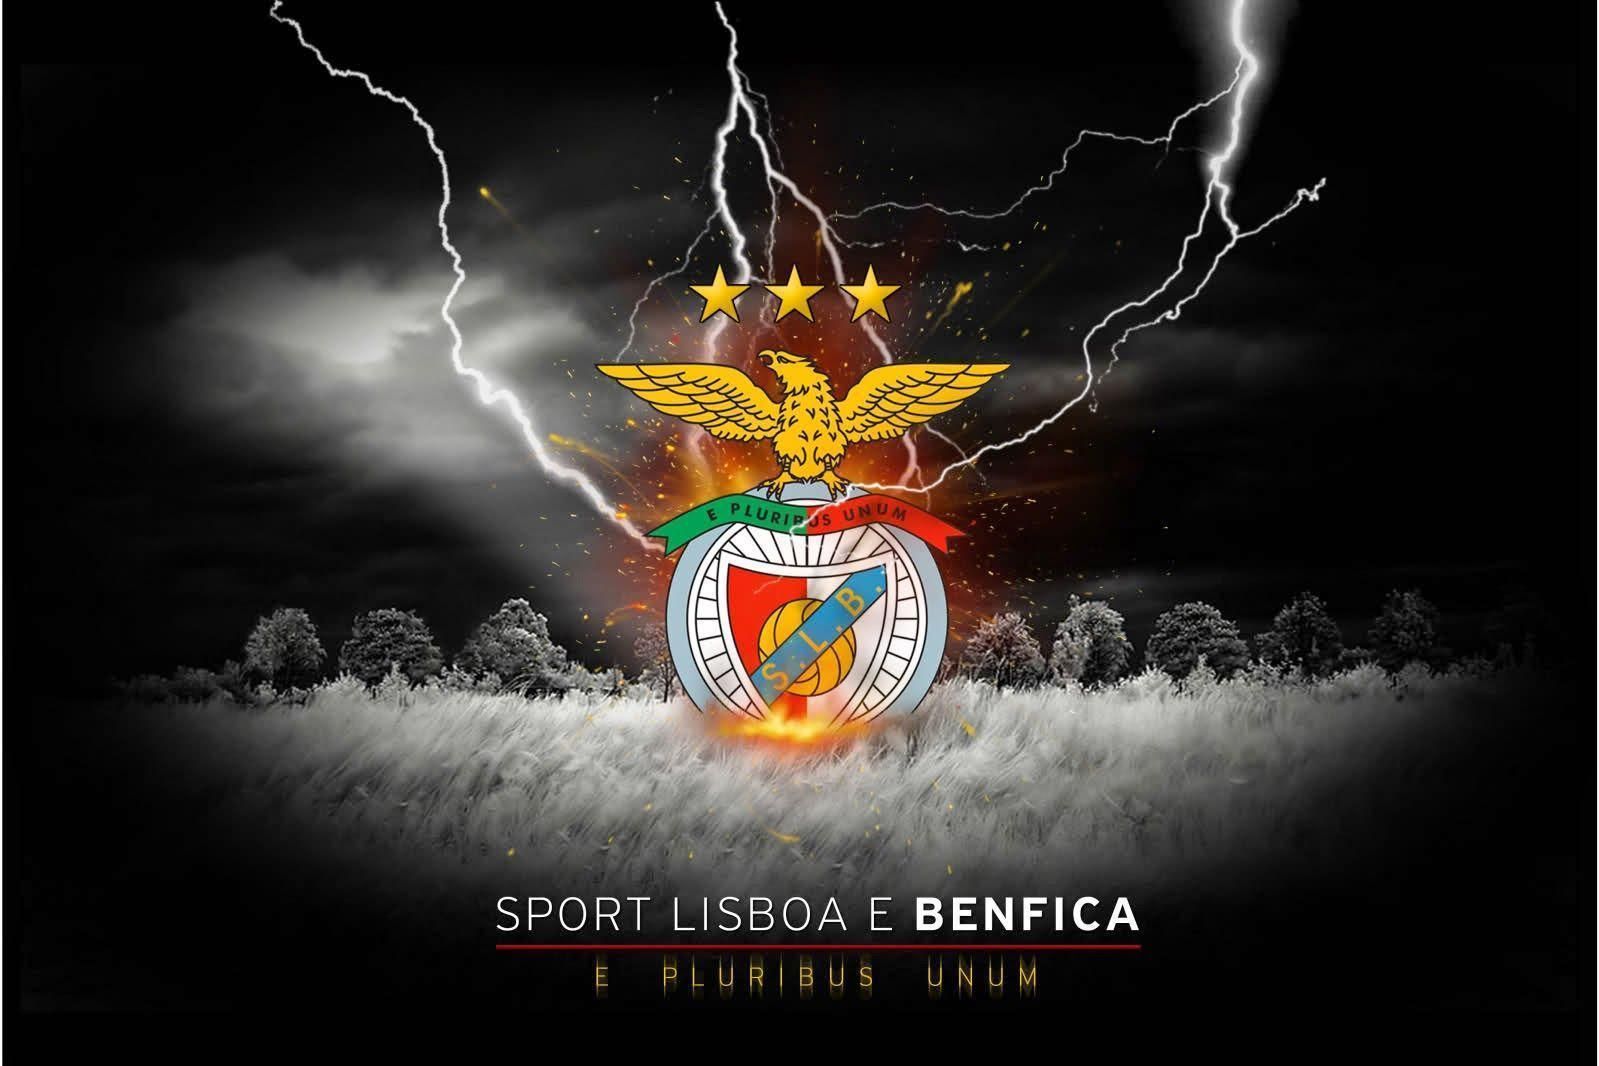 S.L. Benfica Wallpapers